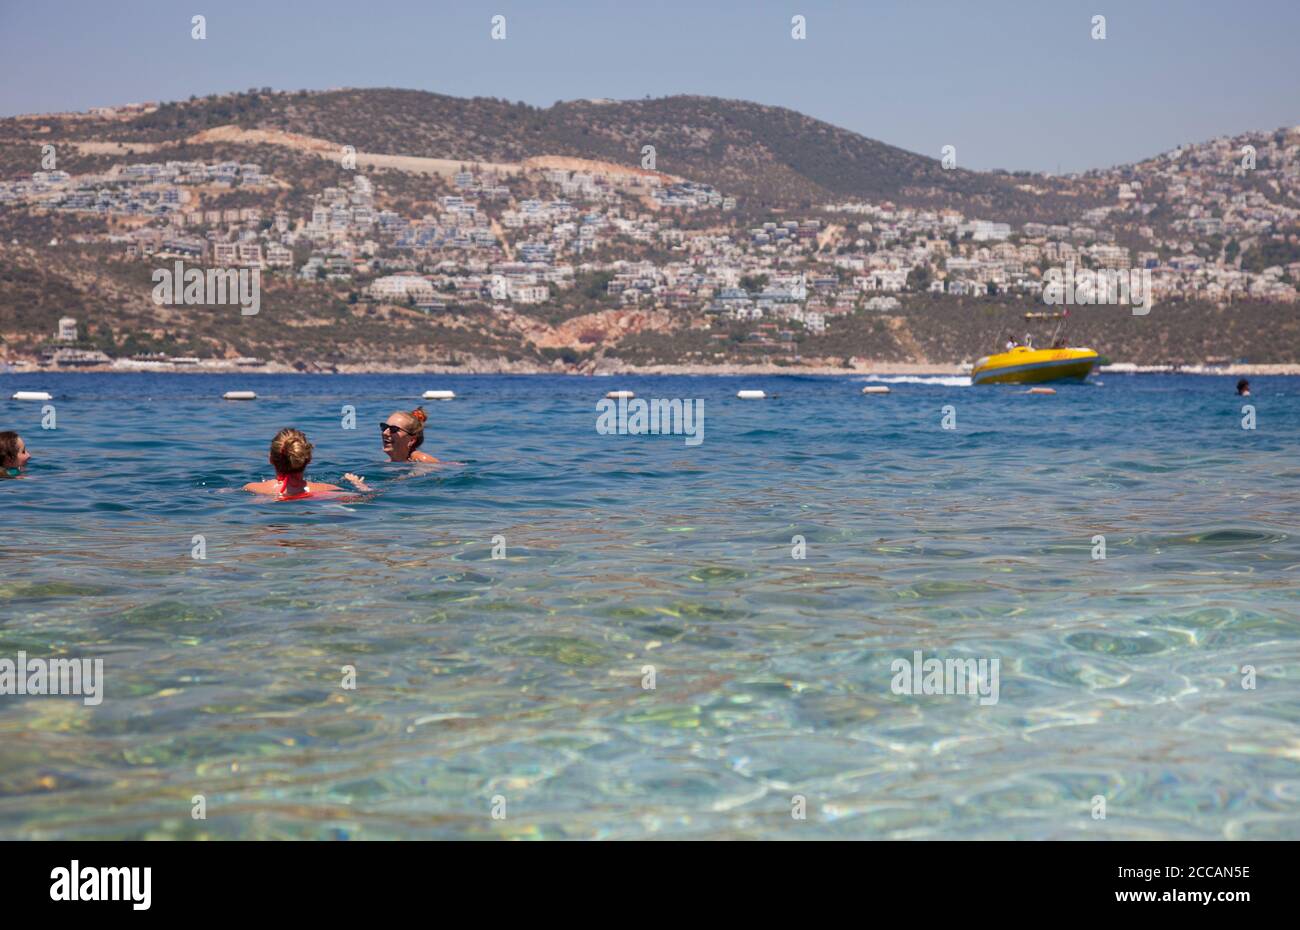 Young women ( model released ) swim at the Kalkan beach club with the town of Kalkan in the bacground. Kalkan is a popular holiday destination and is Stock Photo